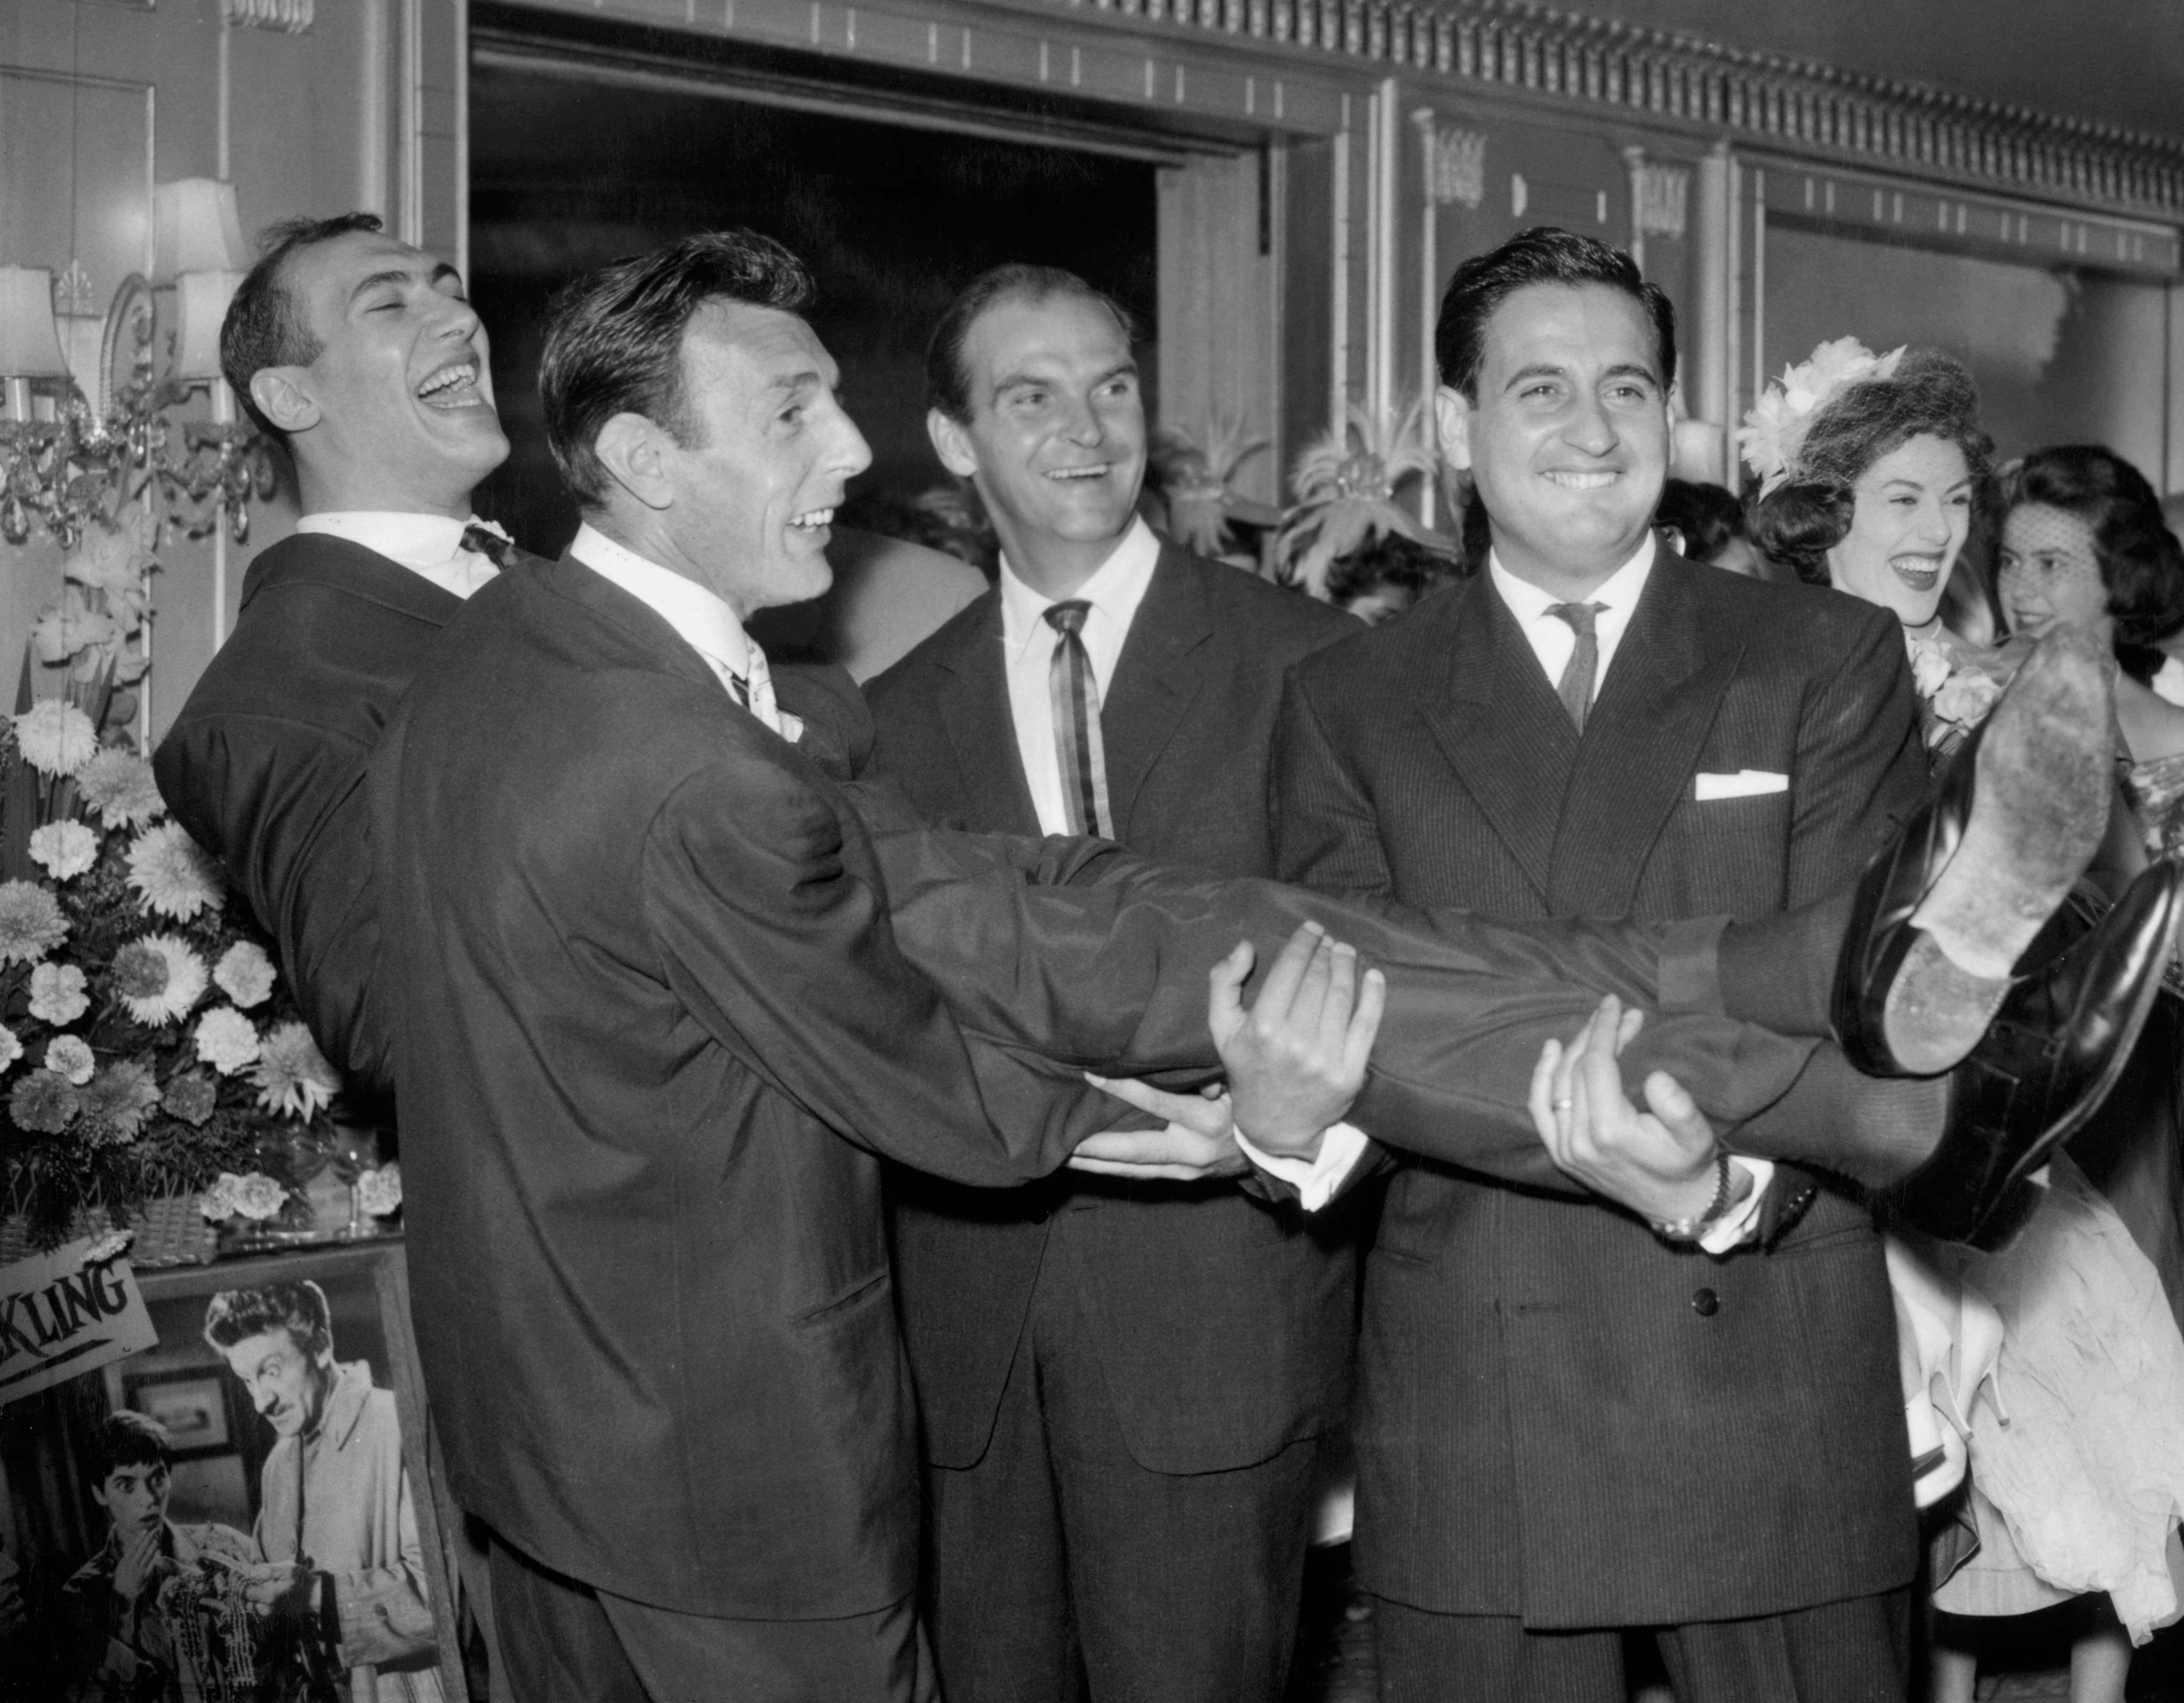 Bernard Bresslaw, 25, after his wedding to dancer Elizabeth Wright at Caxton Hall on 8 August 1959. Carrying Bresslaw, left to right, are; comedian Eric Sykes, actor Stanley Baker and comedian Bernie Winters. The couple remained married, with three children, until Bresslaw died in June 1983.